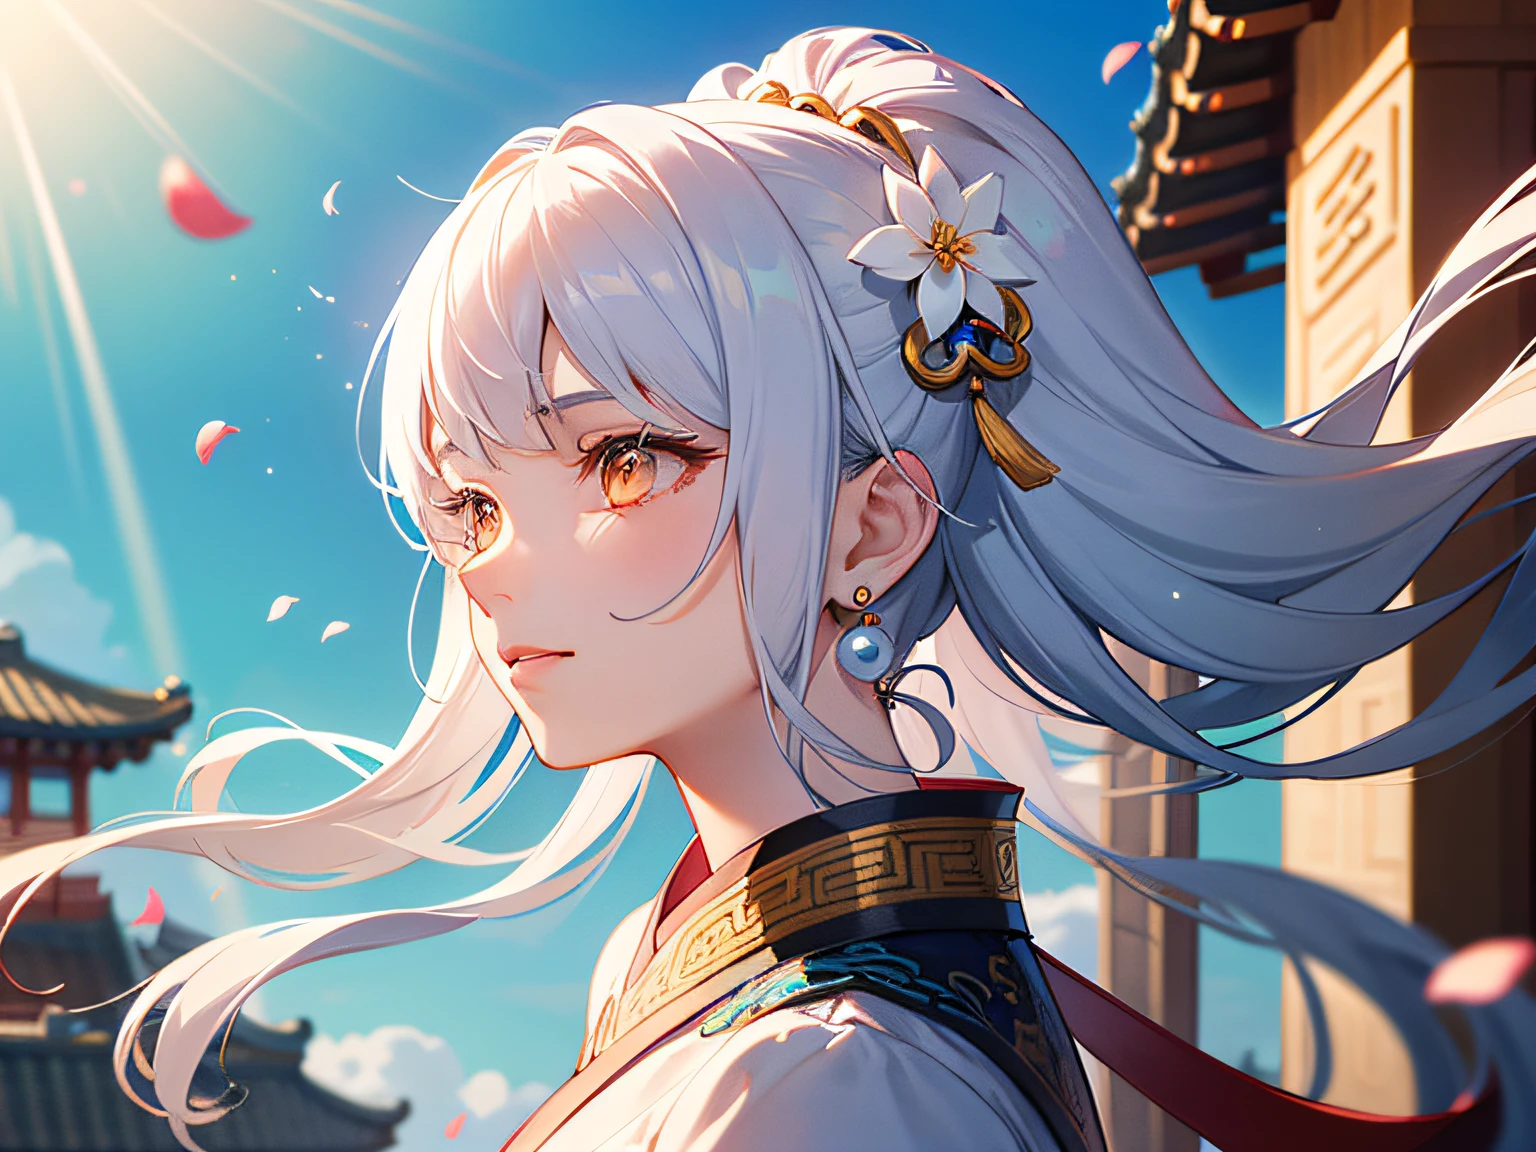 Mature girl, orange eyes, blue-white hair color, floating hair, delicate and flexible eyes, intricate damask hanfu, gorgeous accessories, wearing pearl earrings, fov, f/1.8, masterpiece, ancient Chinese architecture, blue sky, flower petals flying, front portrait shot, Chang'e, side lighting, sunlight on people,